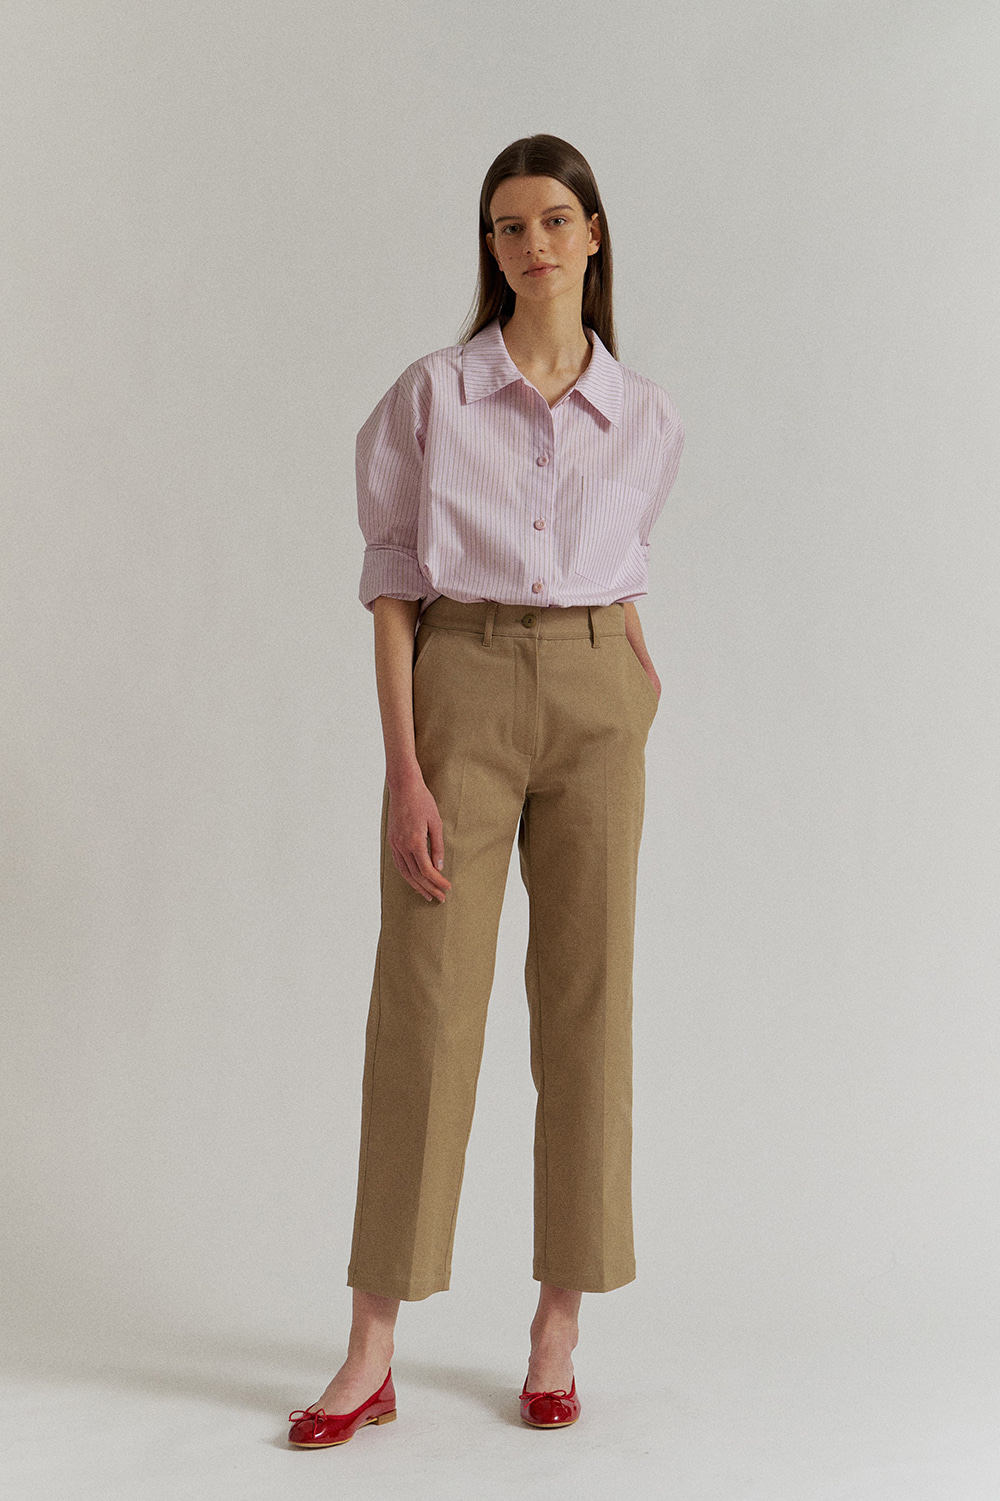 Pluie Stripe Shirts in Lilac Pink